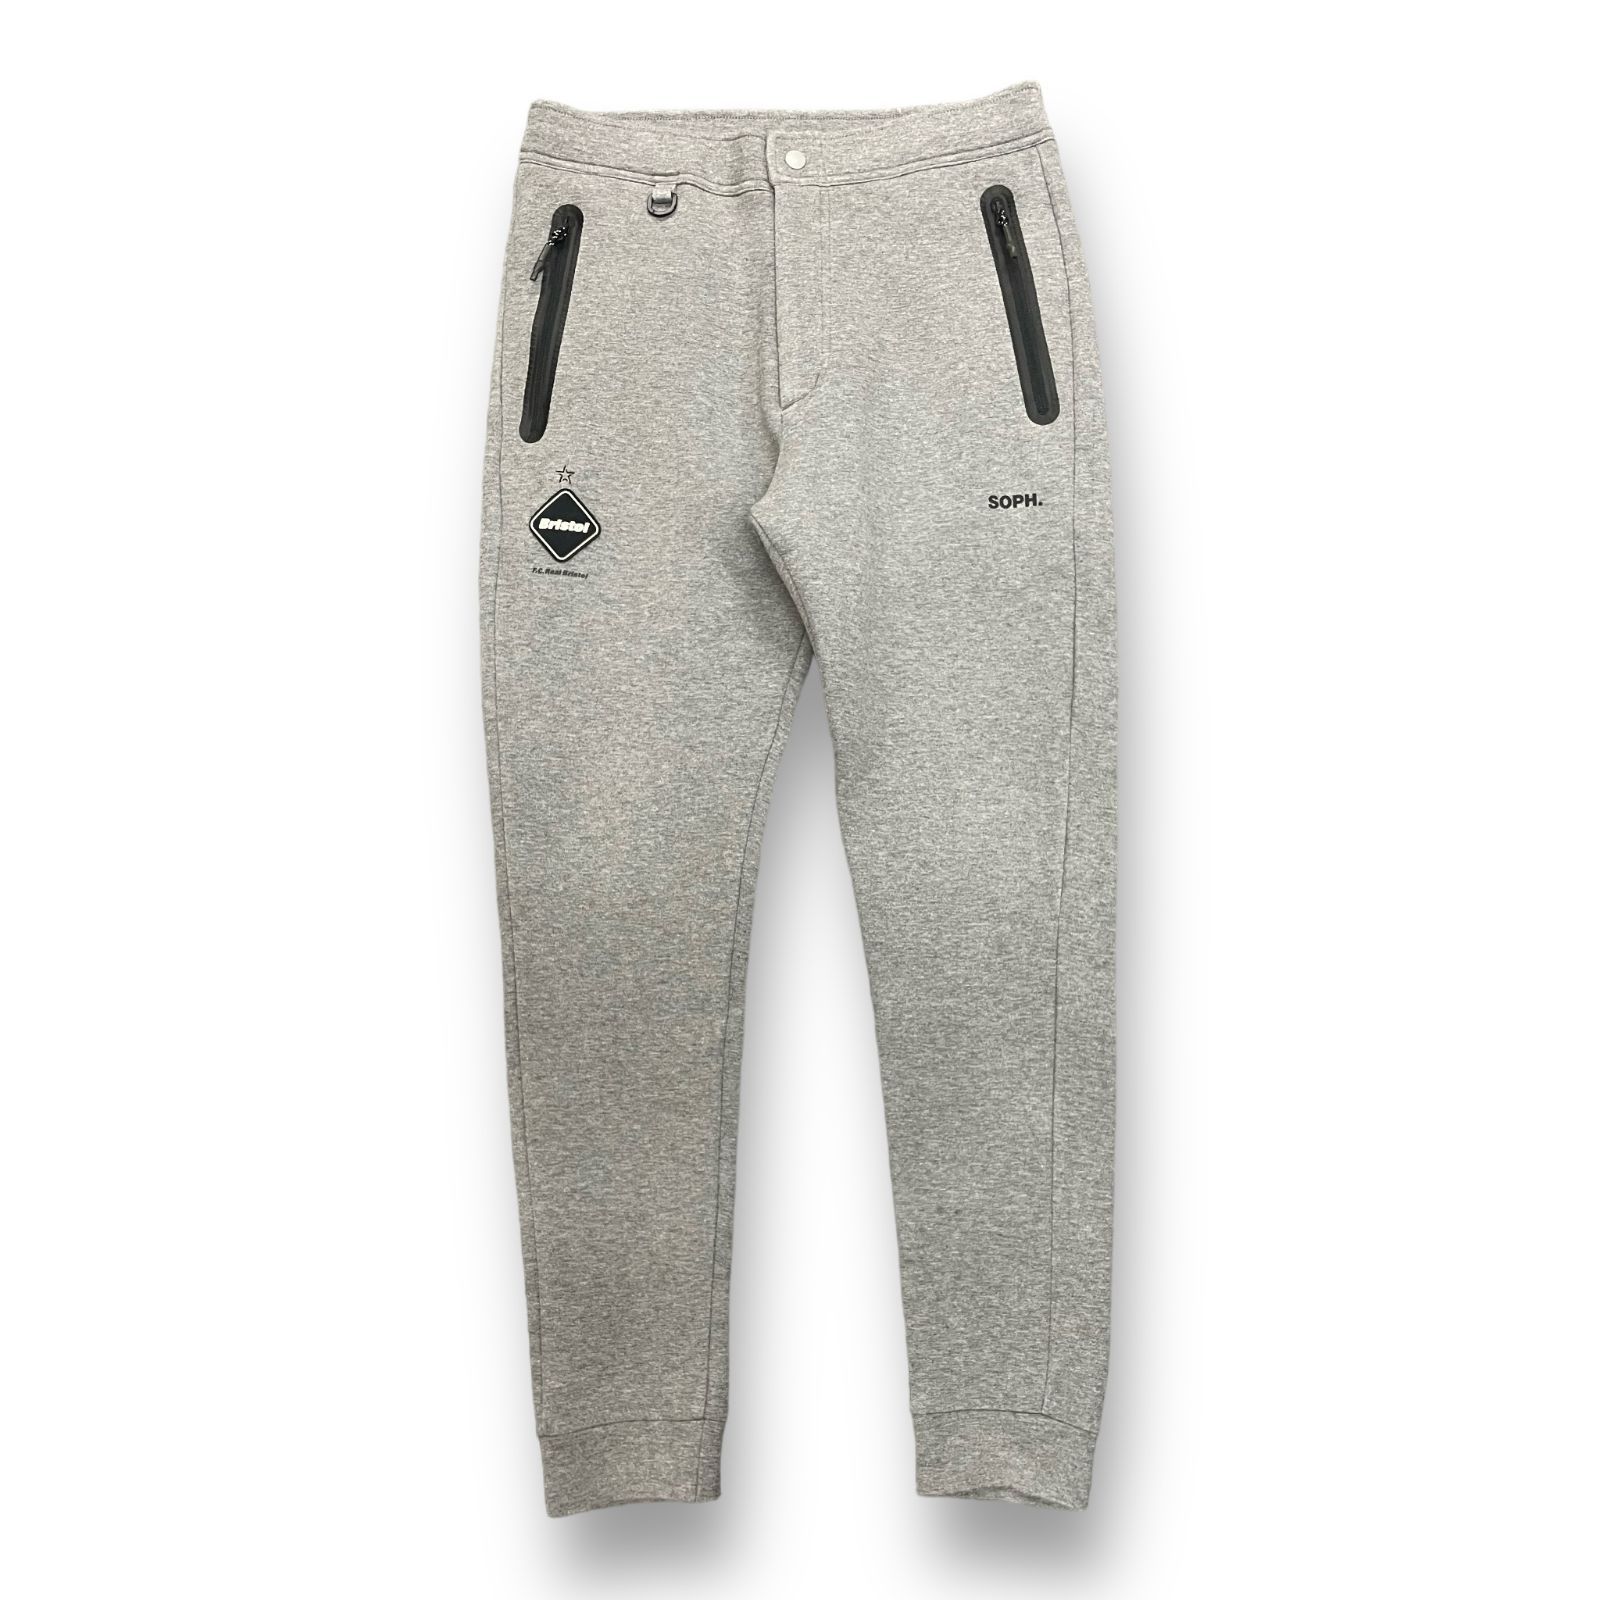 F.C.Real Bristol 20AW SWEAT TRAINING PANTS FCRB-202032 テック